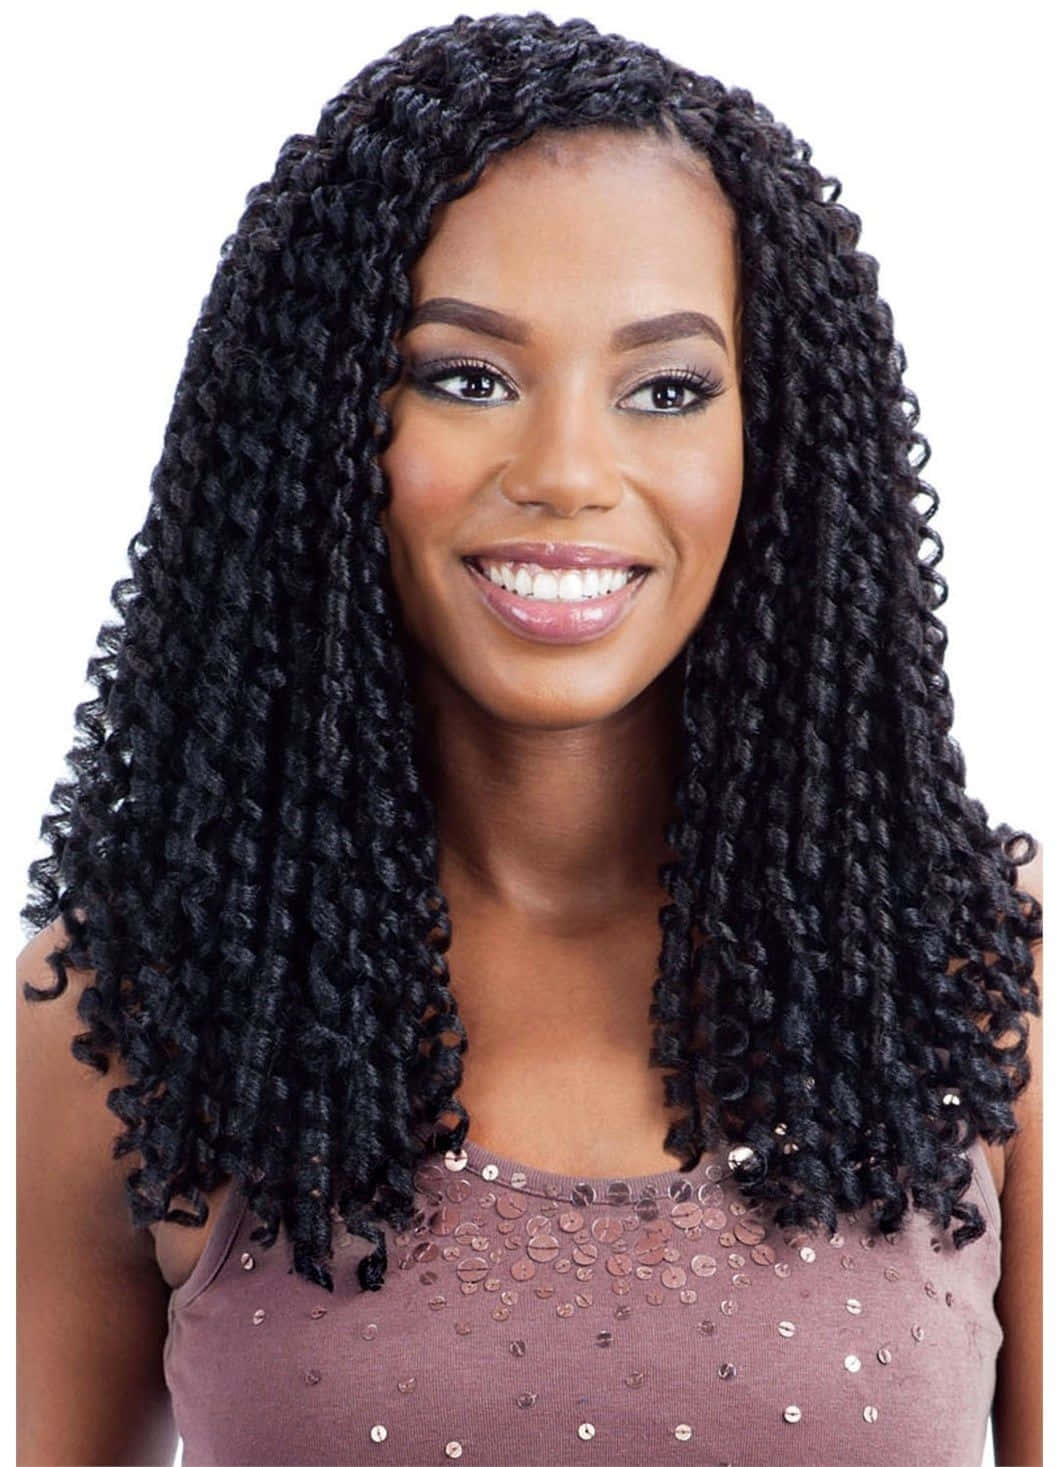 A Black Woman With Long Hair And A Smile